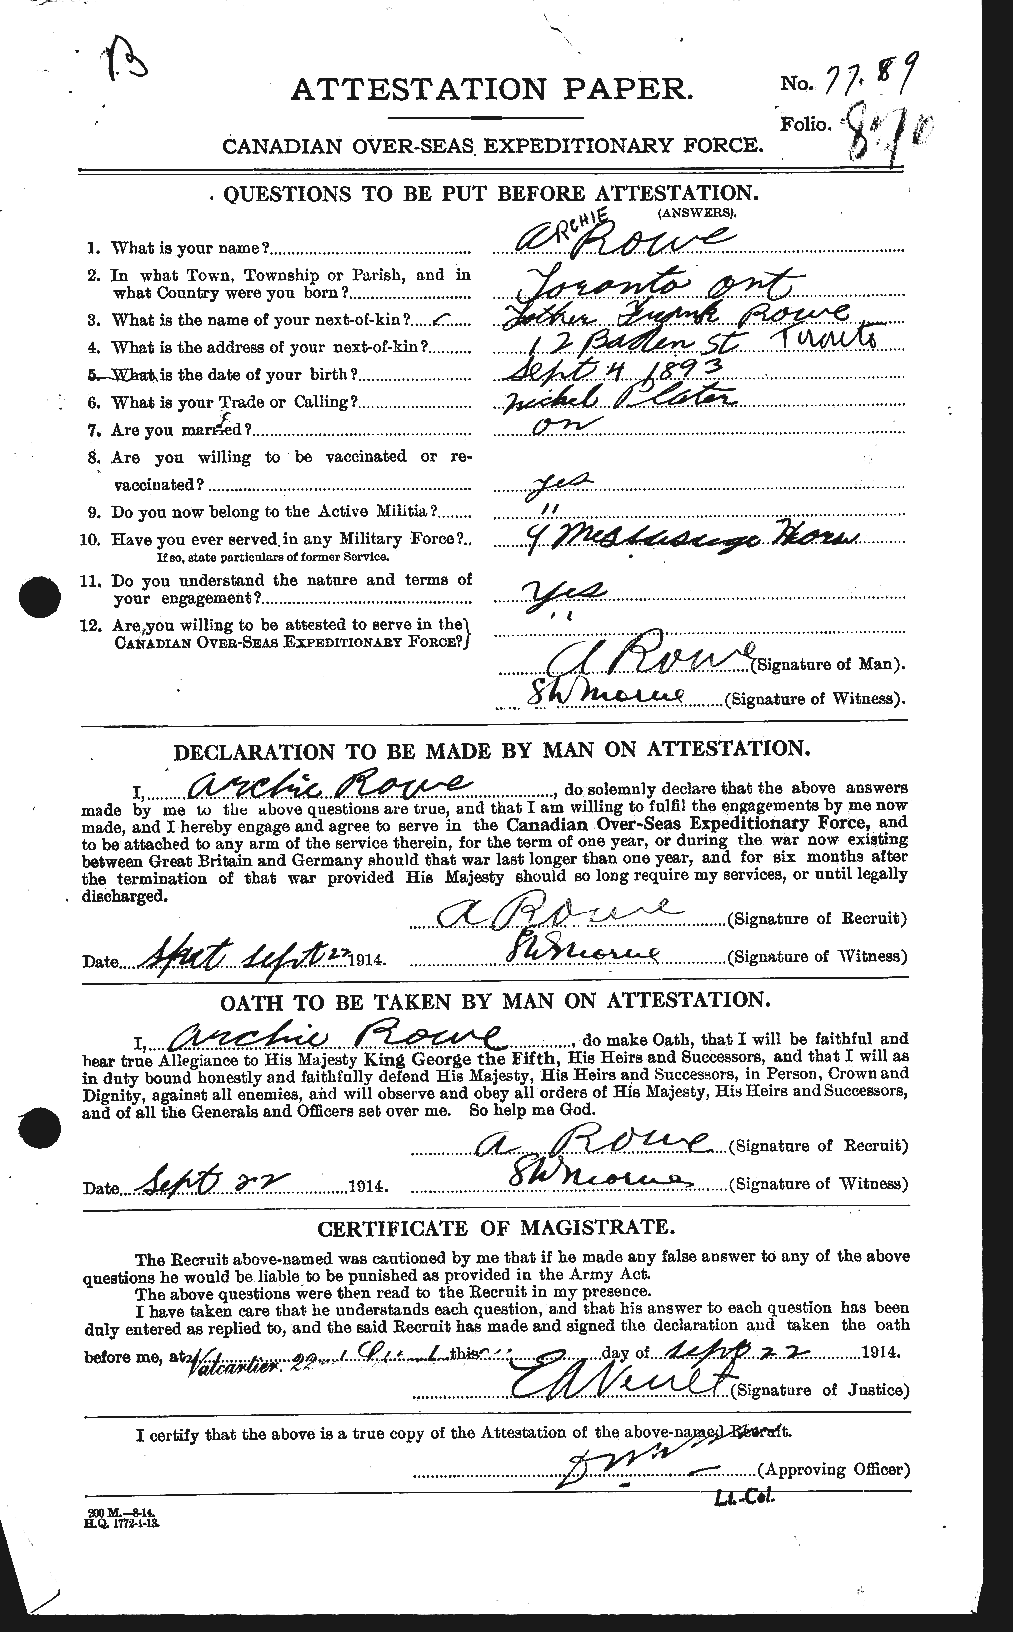 Personnel Records of the First World War - CEF 615789a